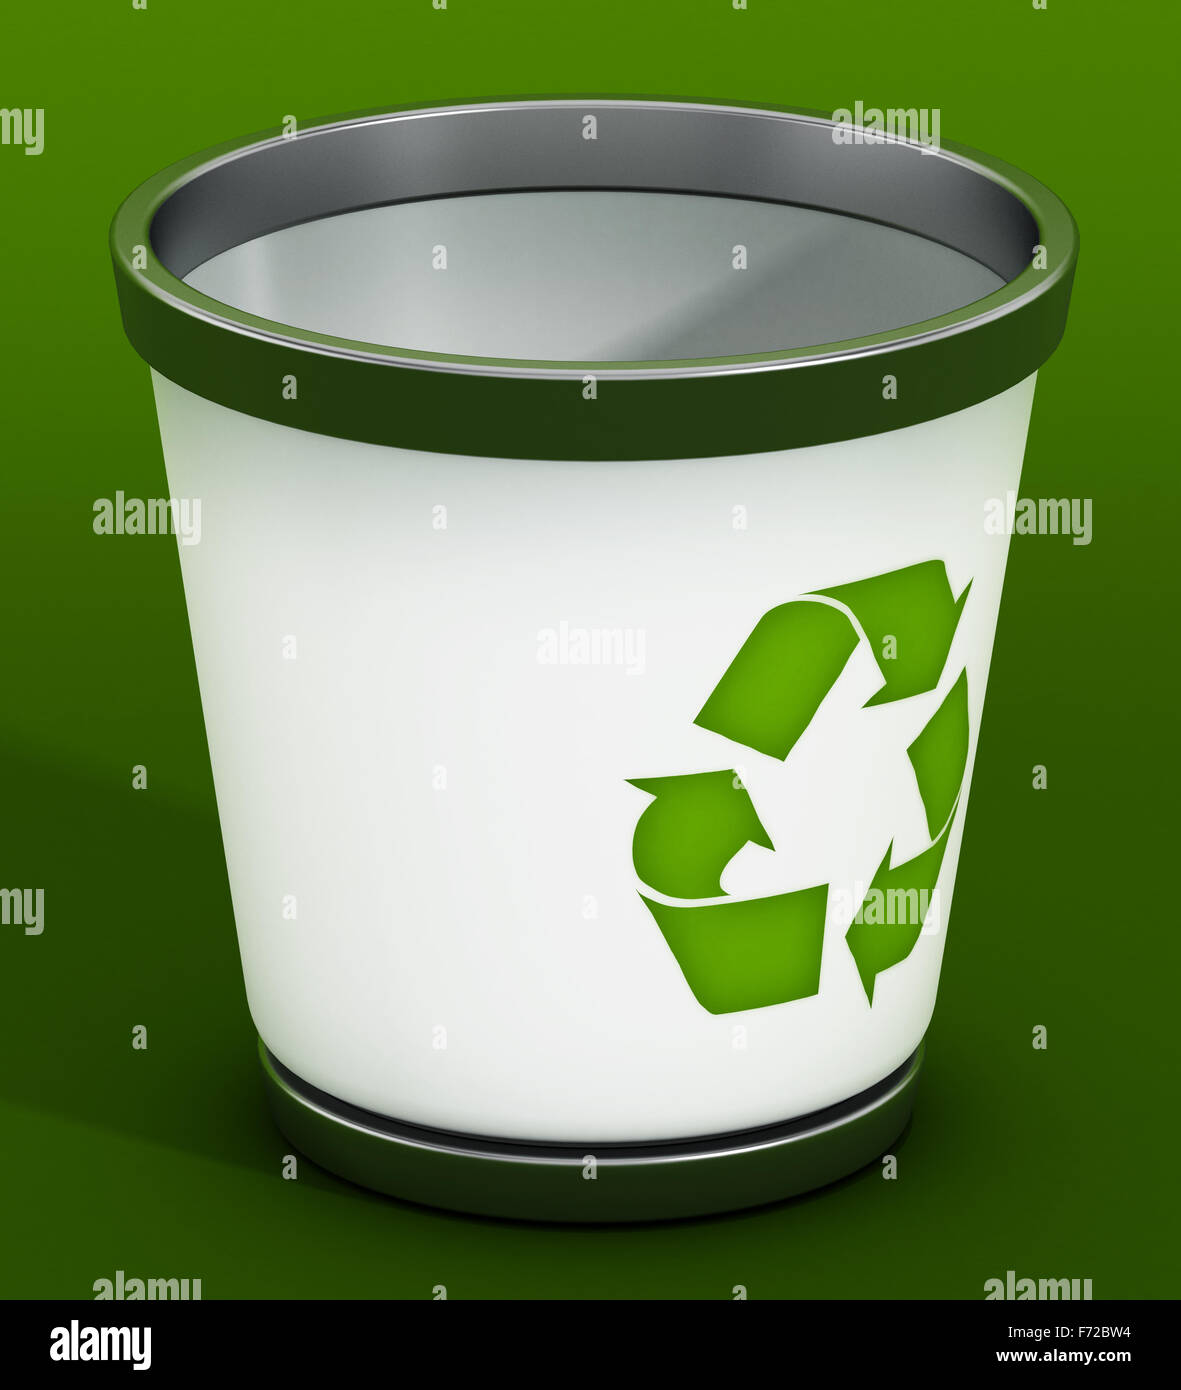 Recycle bin standing on green background Stock Photo